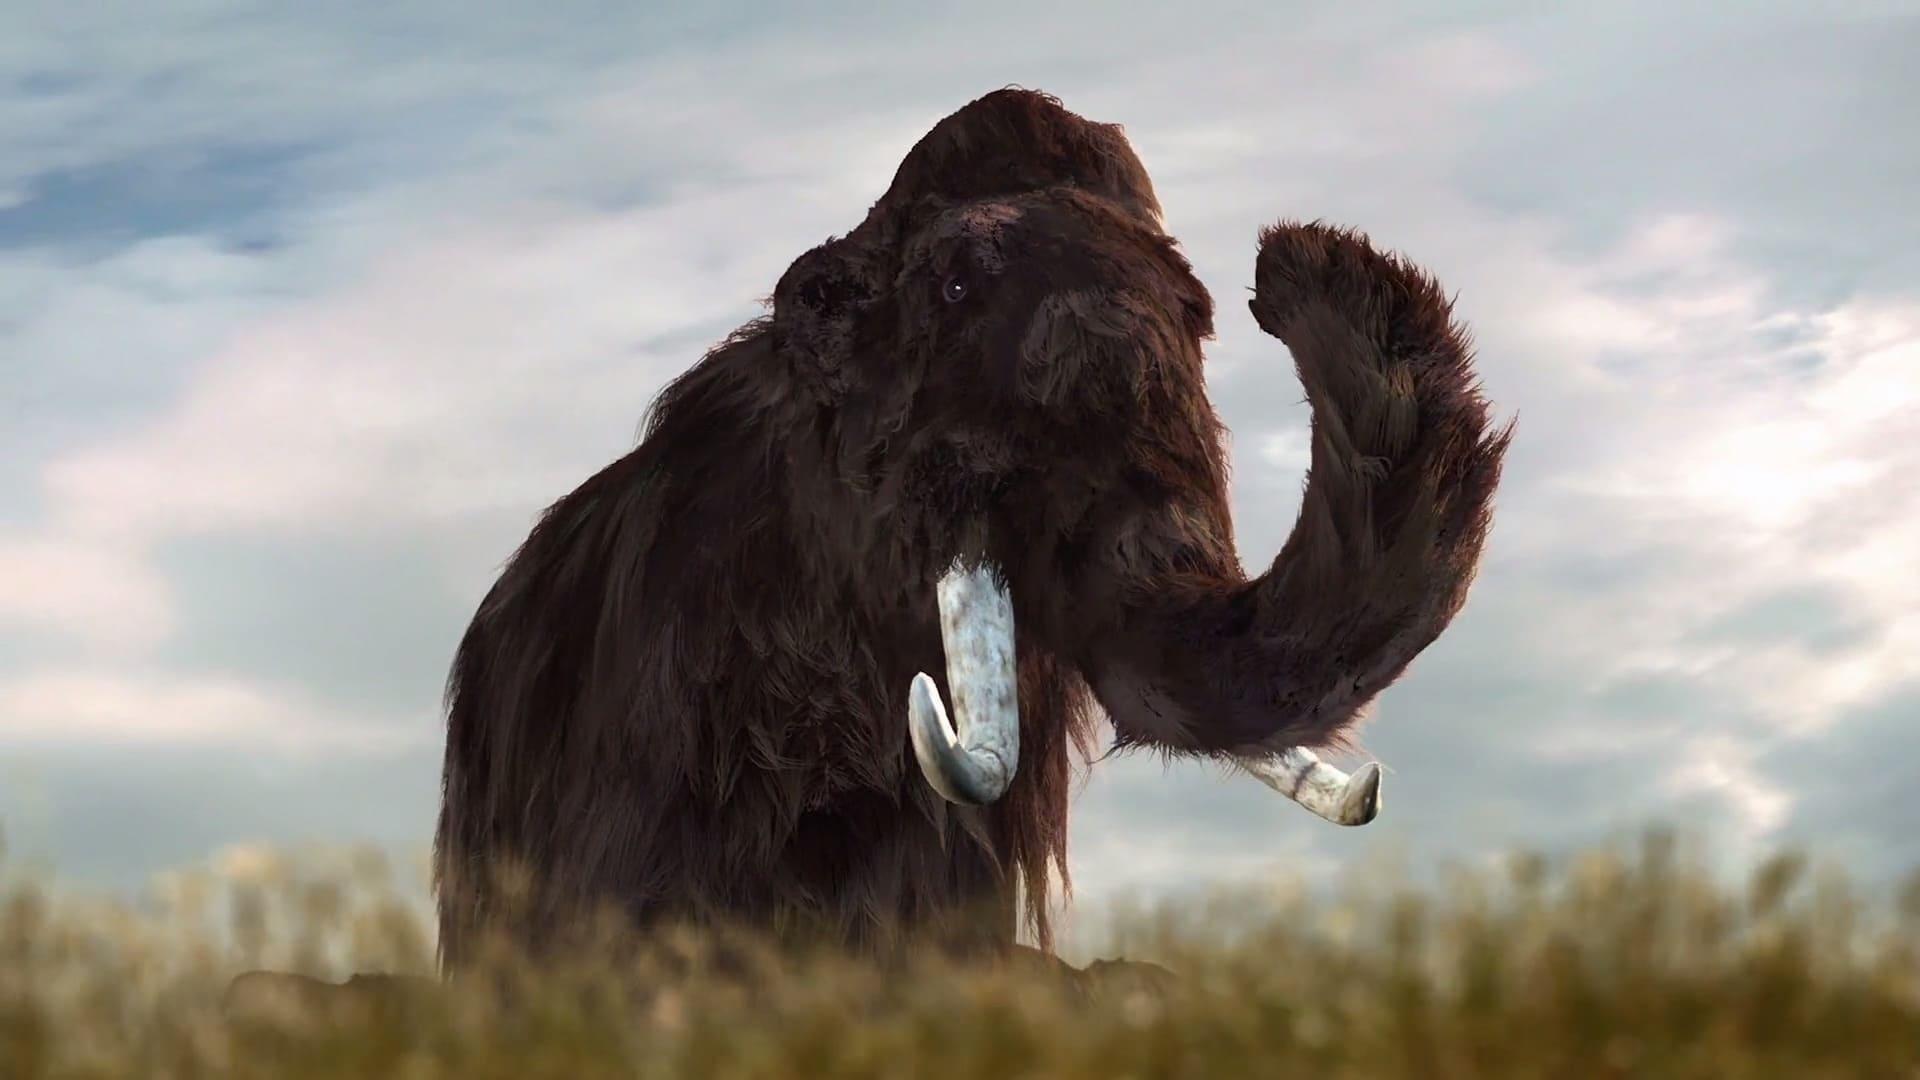 Mammoths: Giants of the Ice Age backdrop